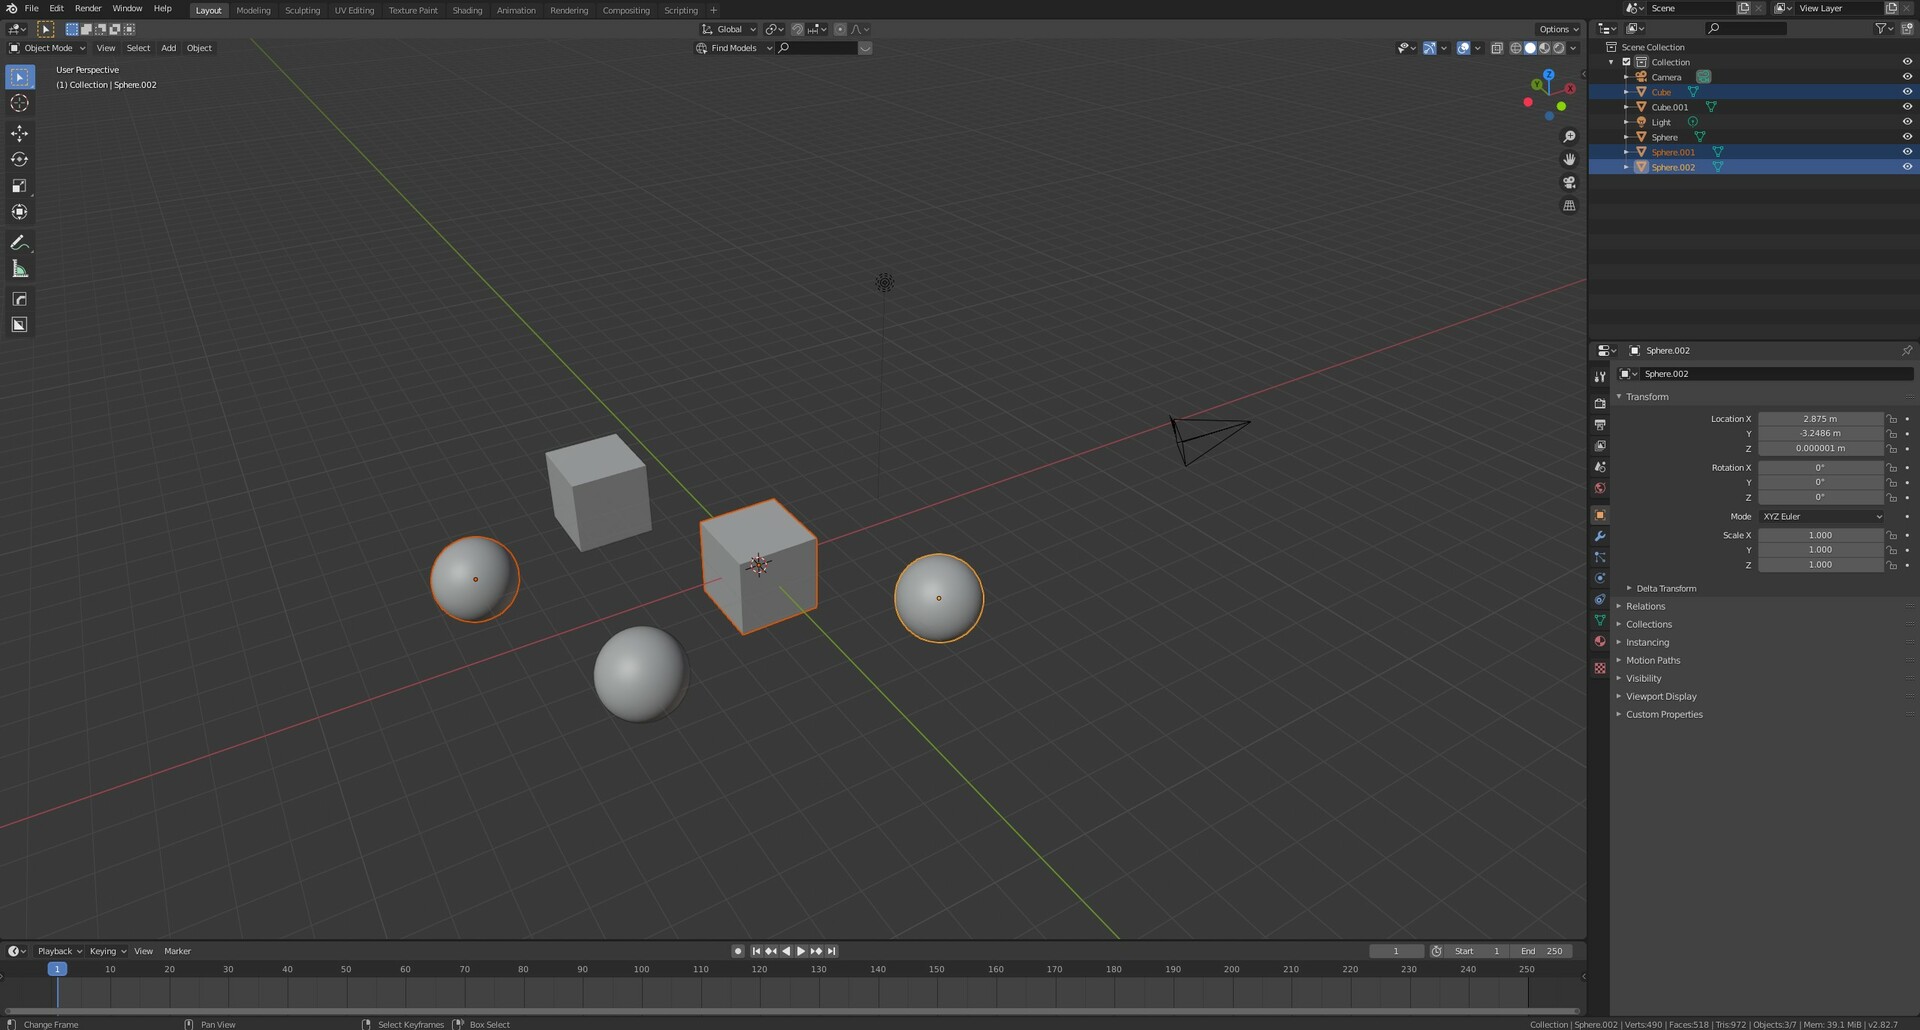 ArtStation - Perfect Exporting from Blender to Unity